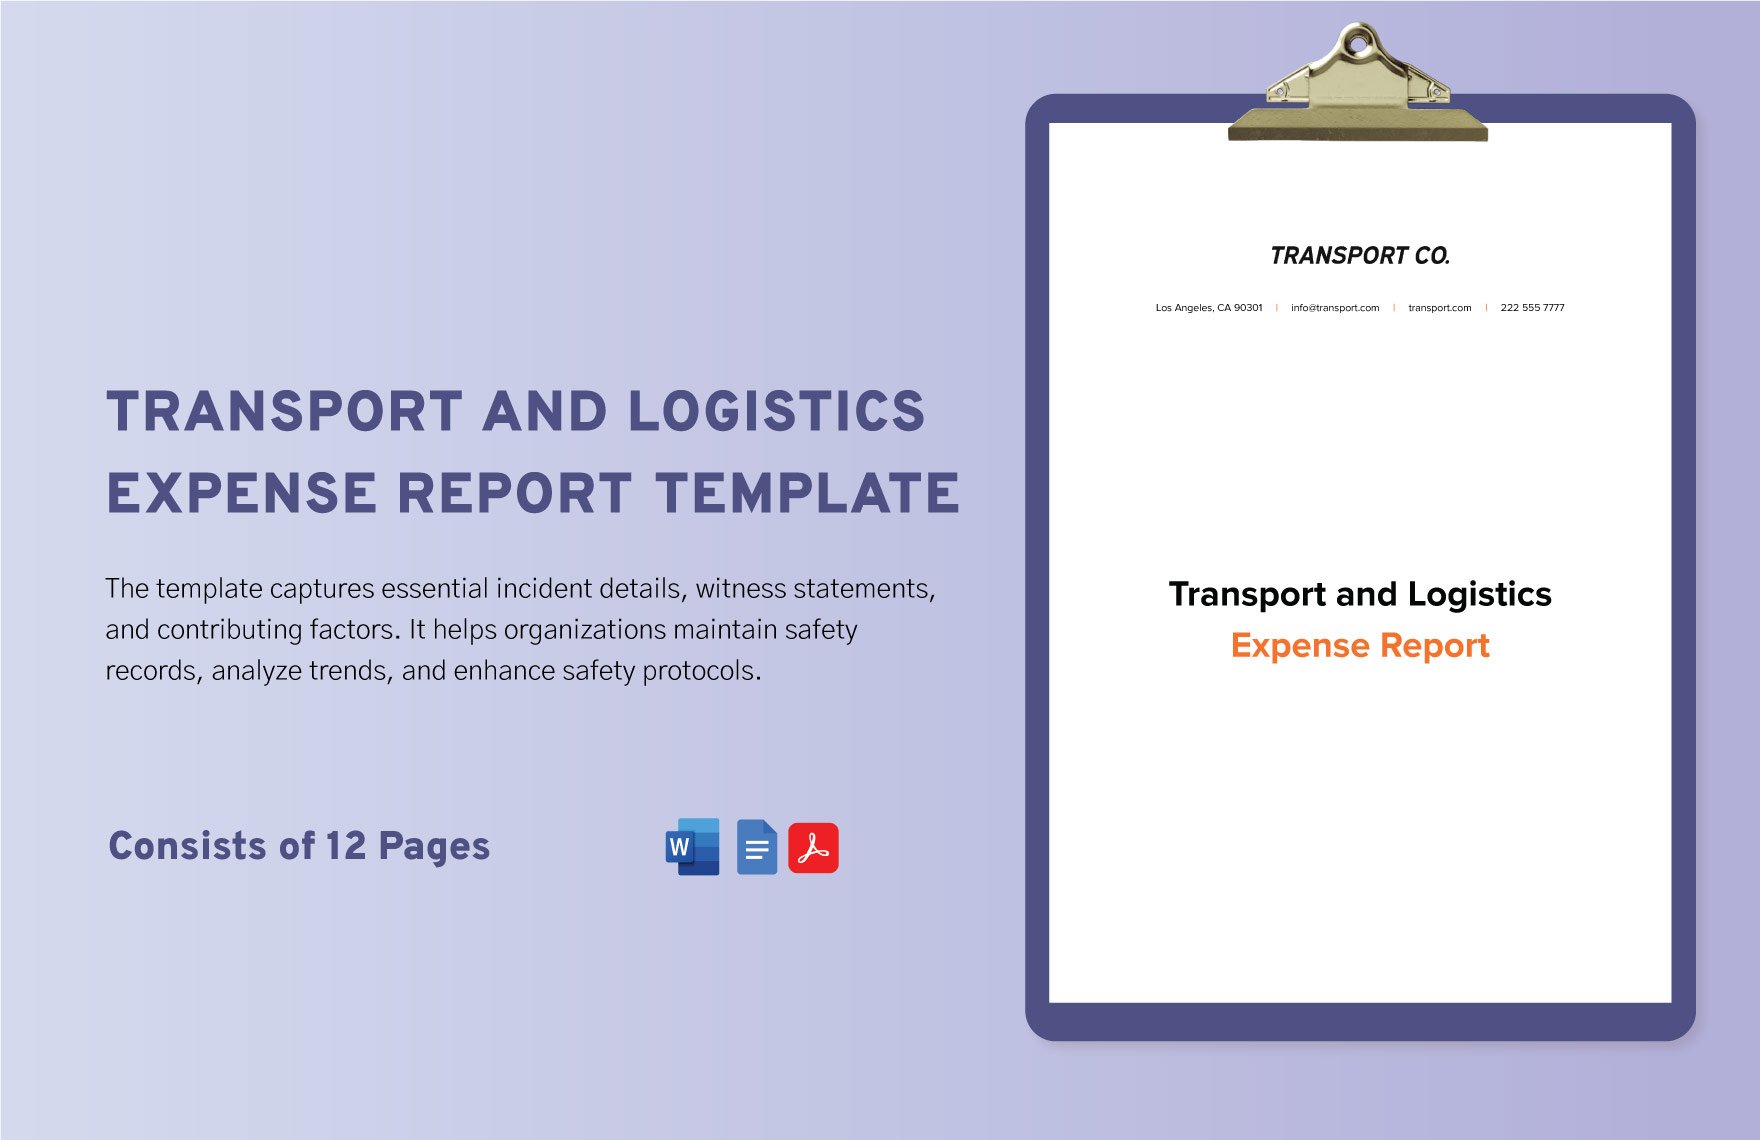 Transport and Logistics Expense Report Template